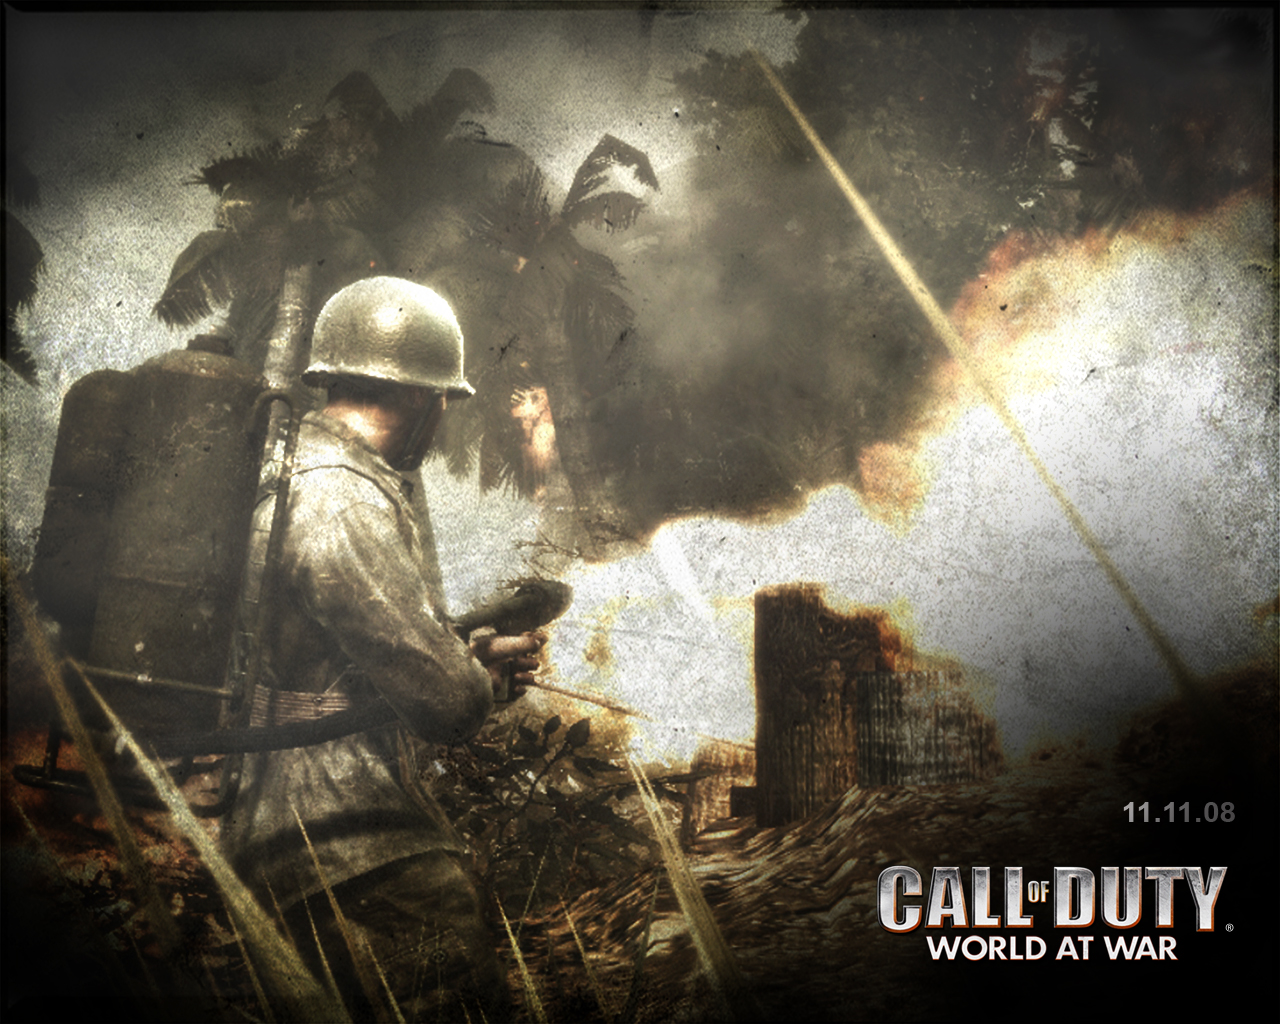 Call of duty world at war wallpapers